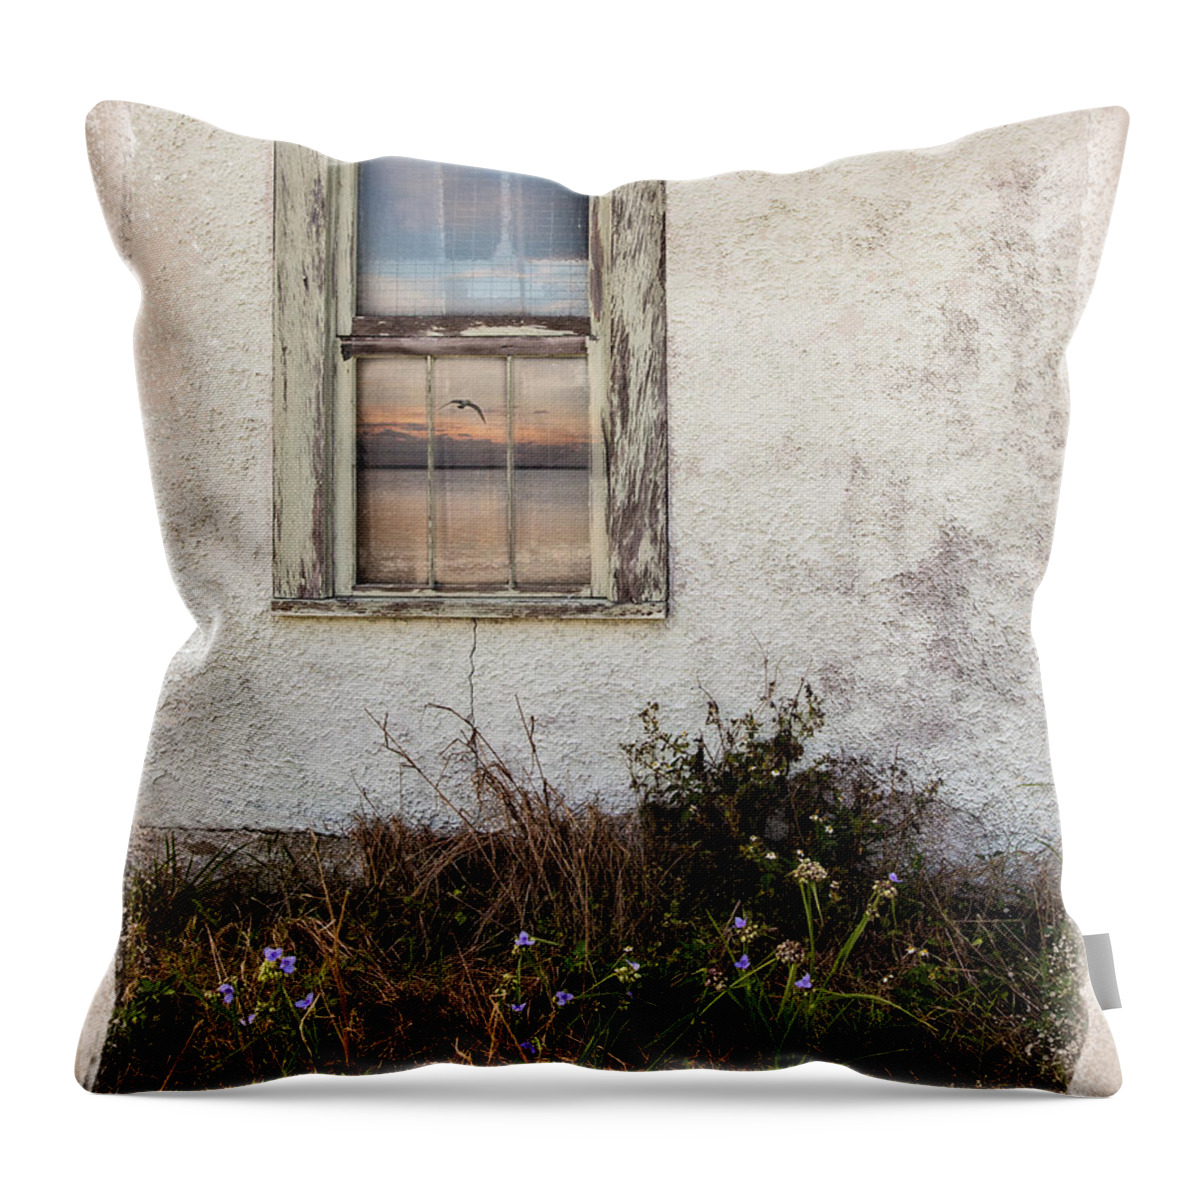 Shara Abel Throw Pillow featuring the photograph Peaceful Reflection by Shara Abel